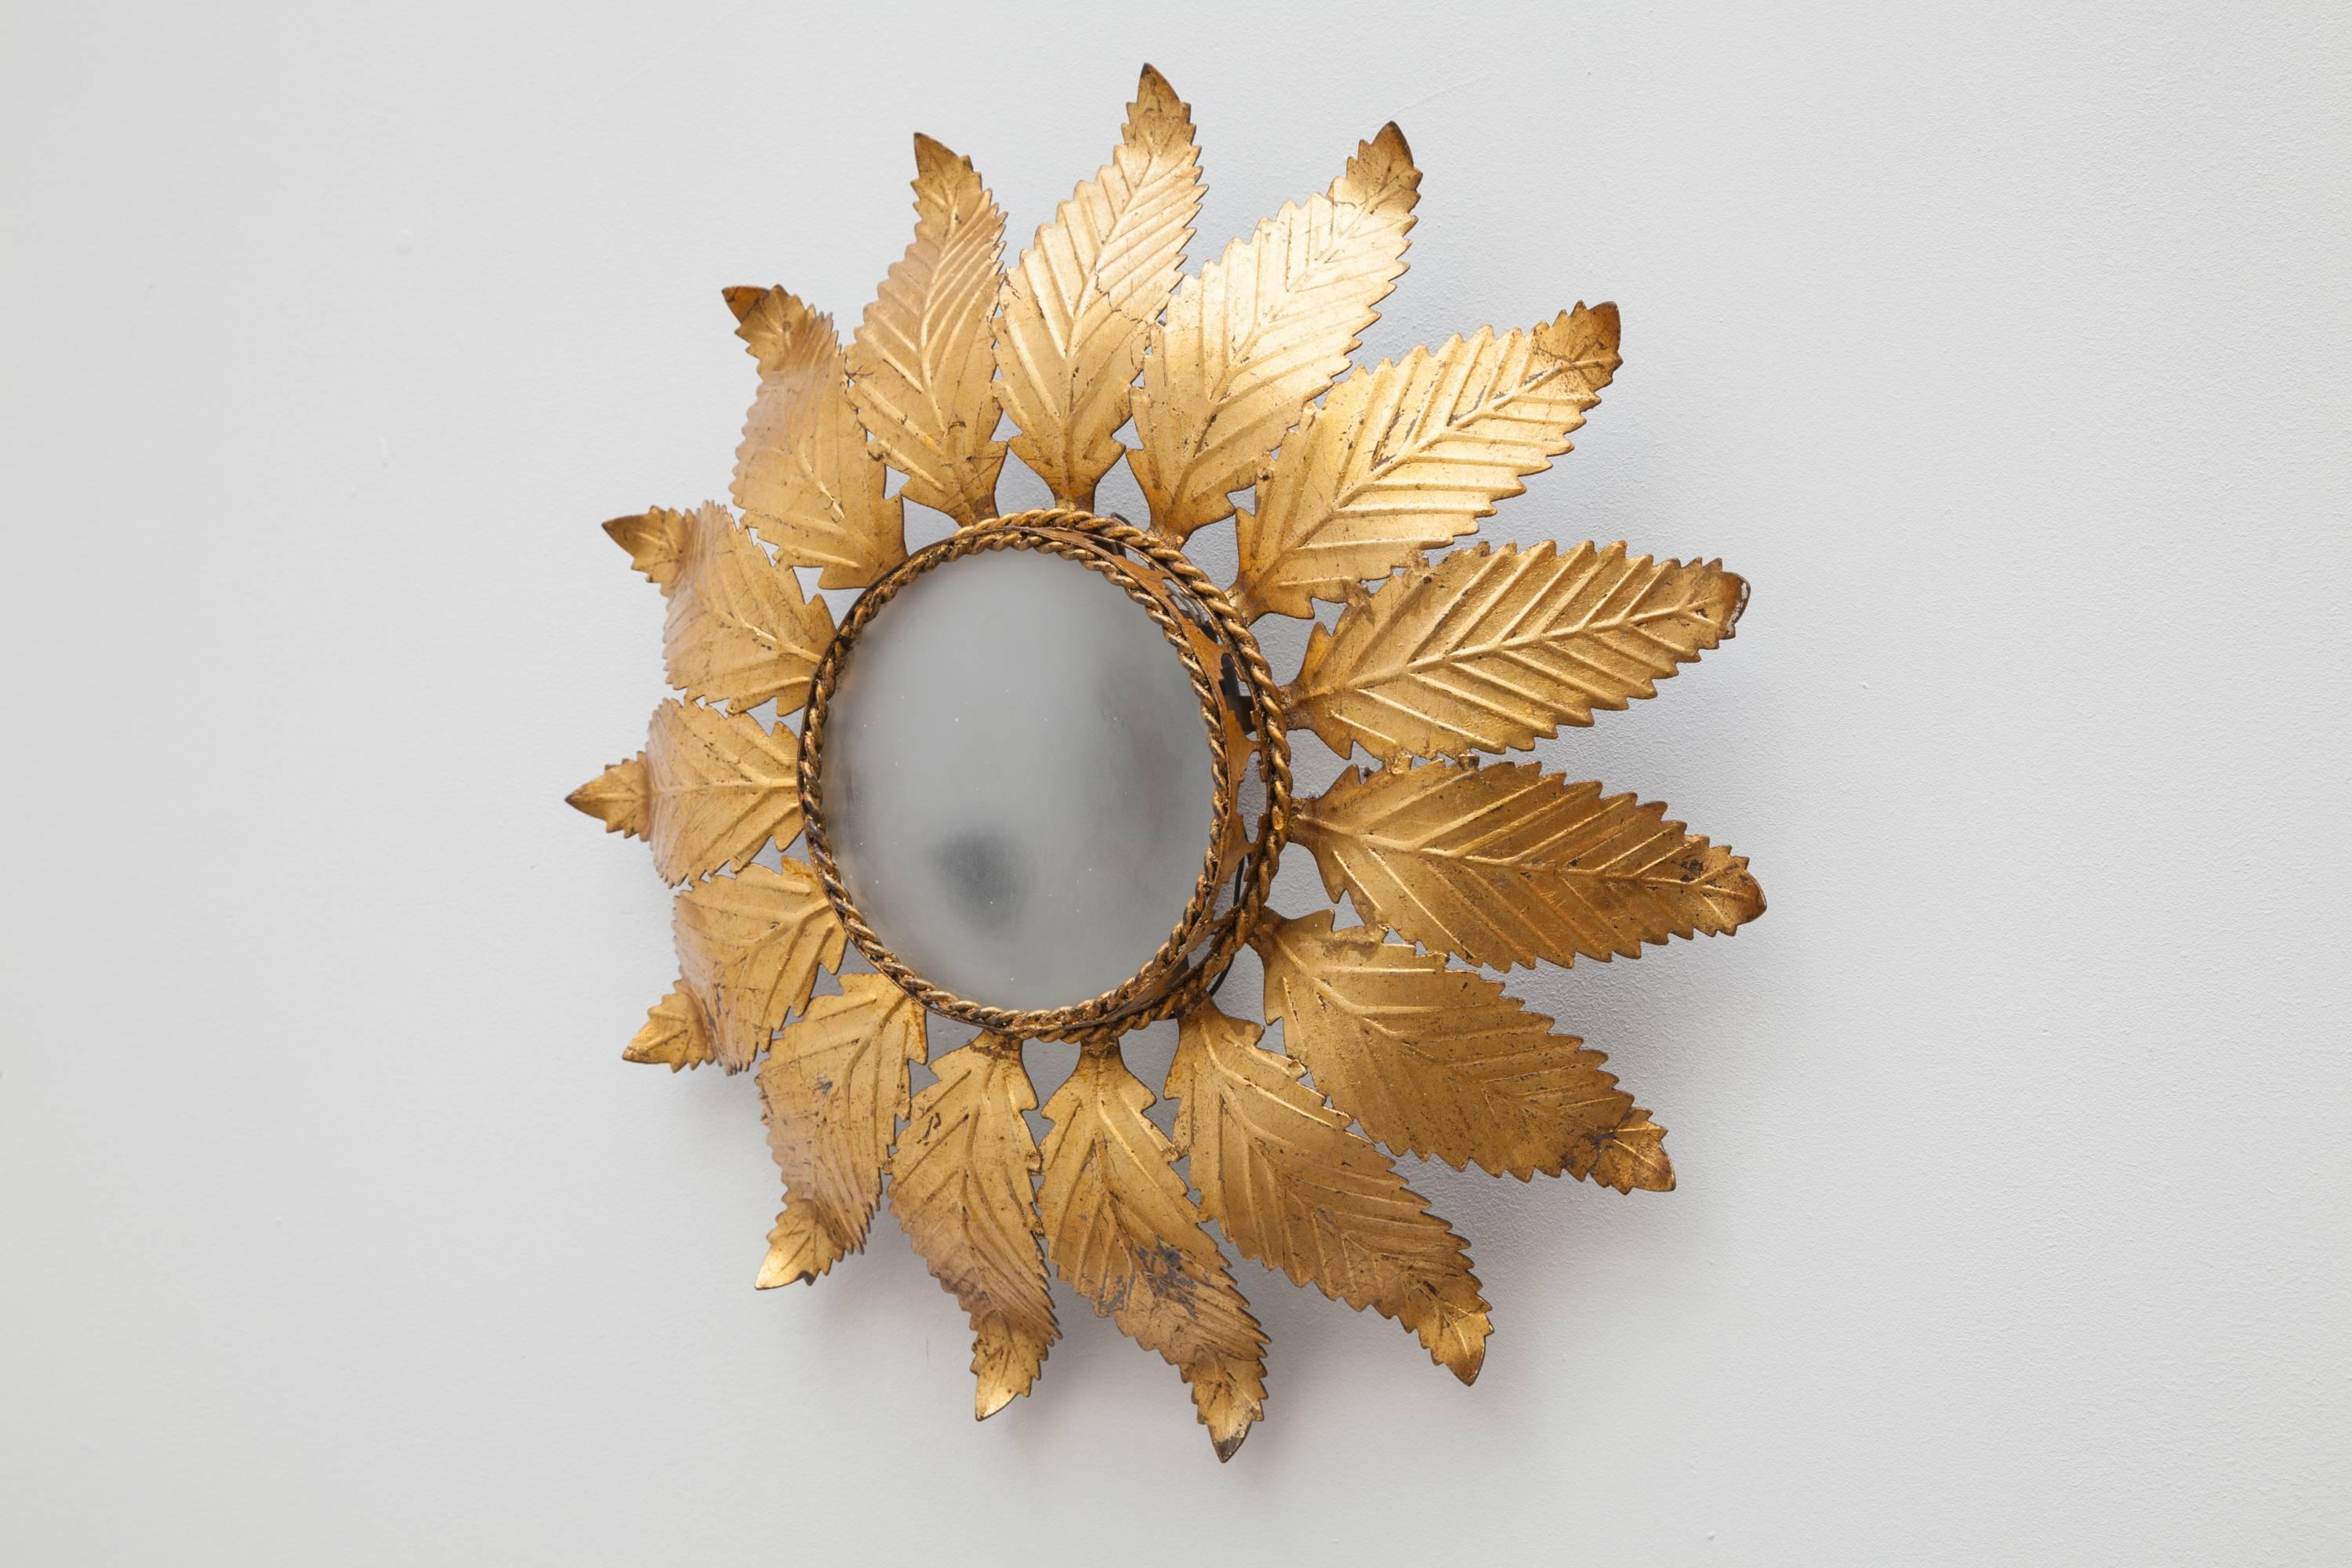 Surrealist sun with a hammered brass face designed in the 1950s, this beautiful fixture has two lights that illuminate the
glass delightful with the floral gold leafs.